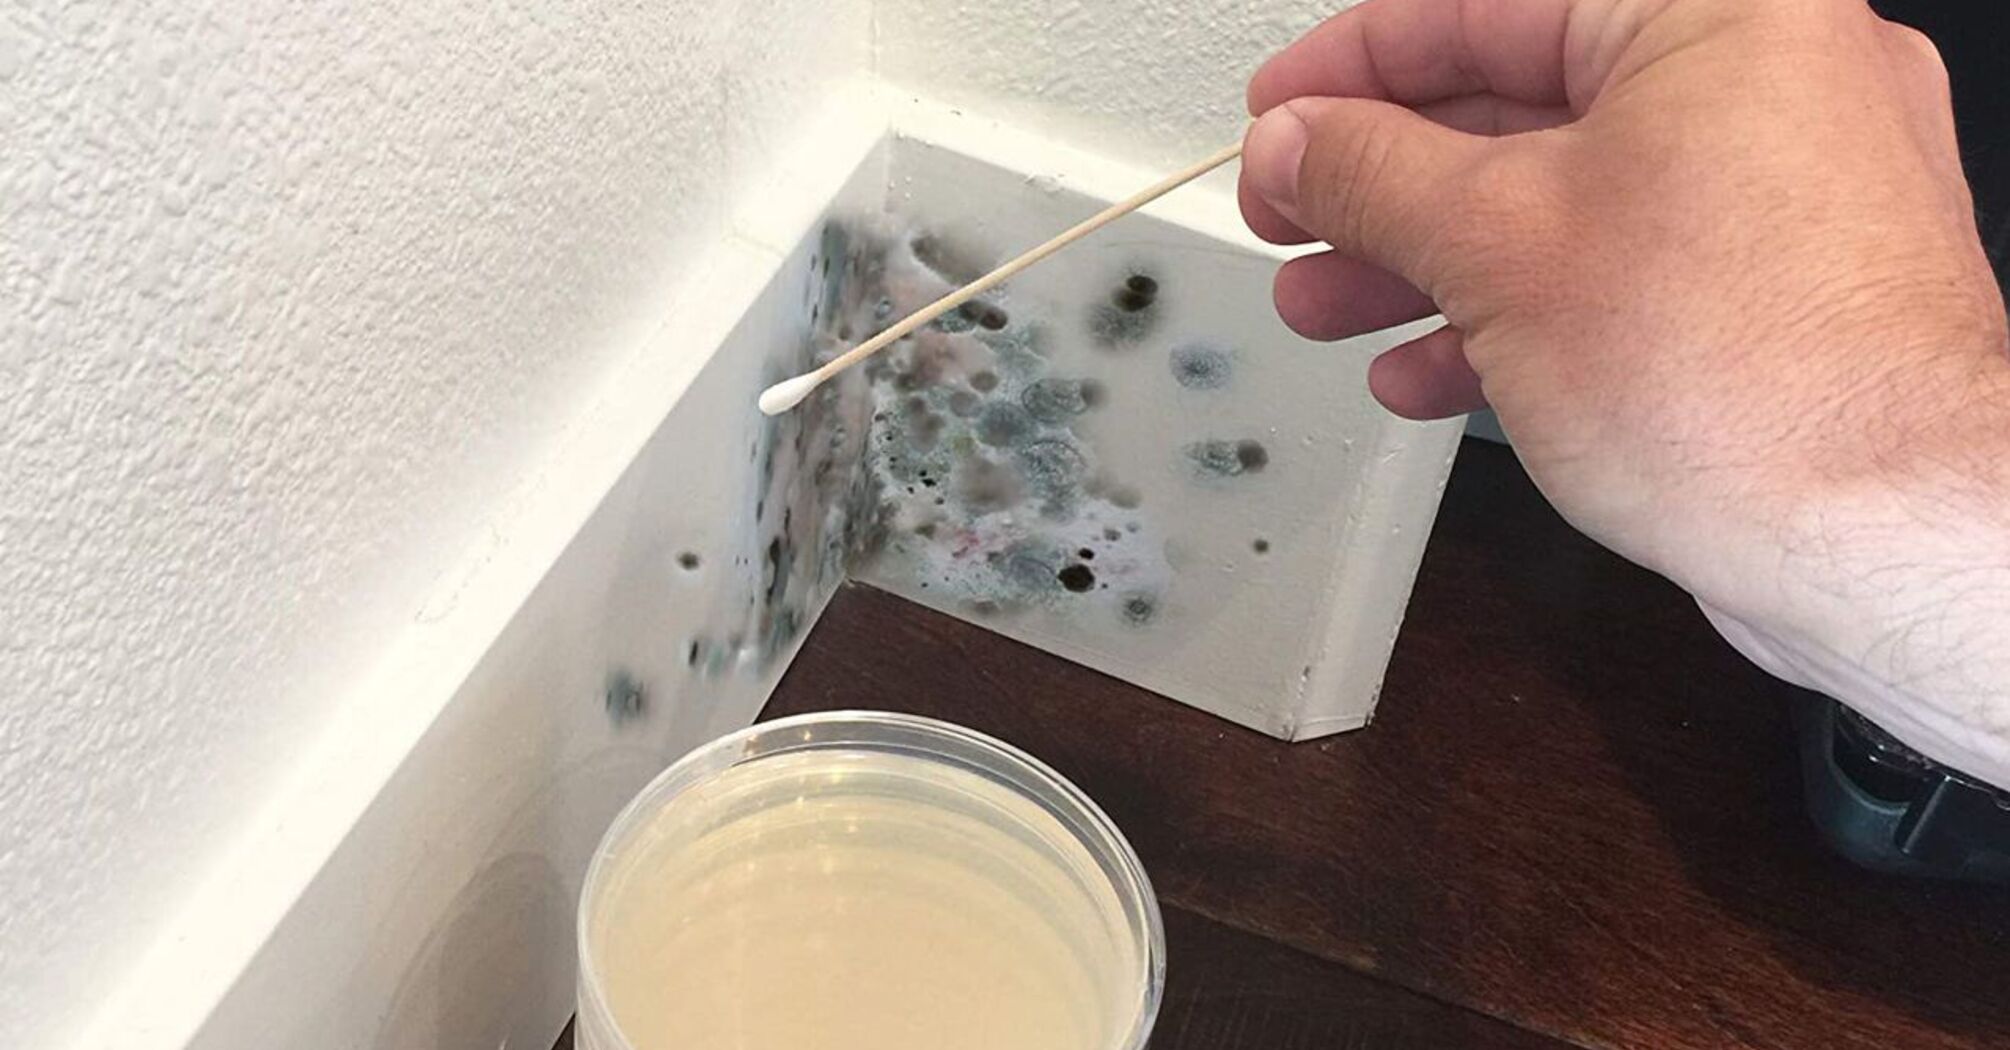 How to deal with mold in the house